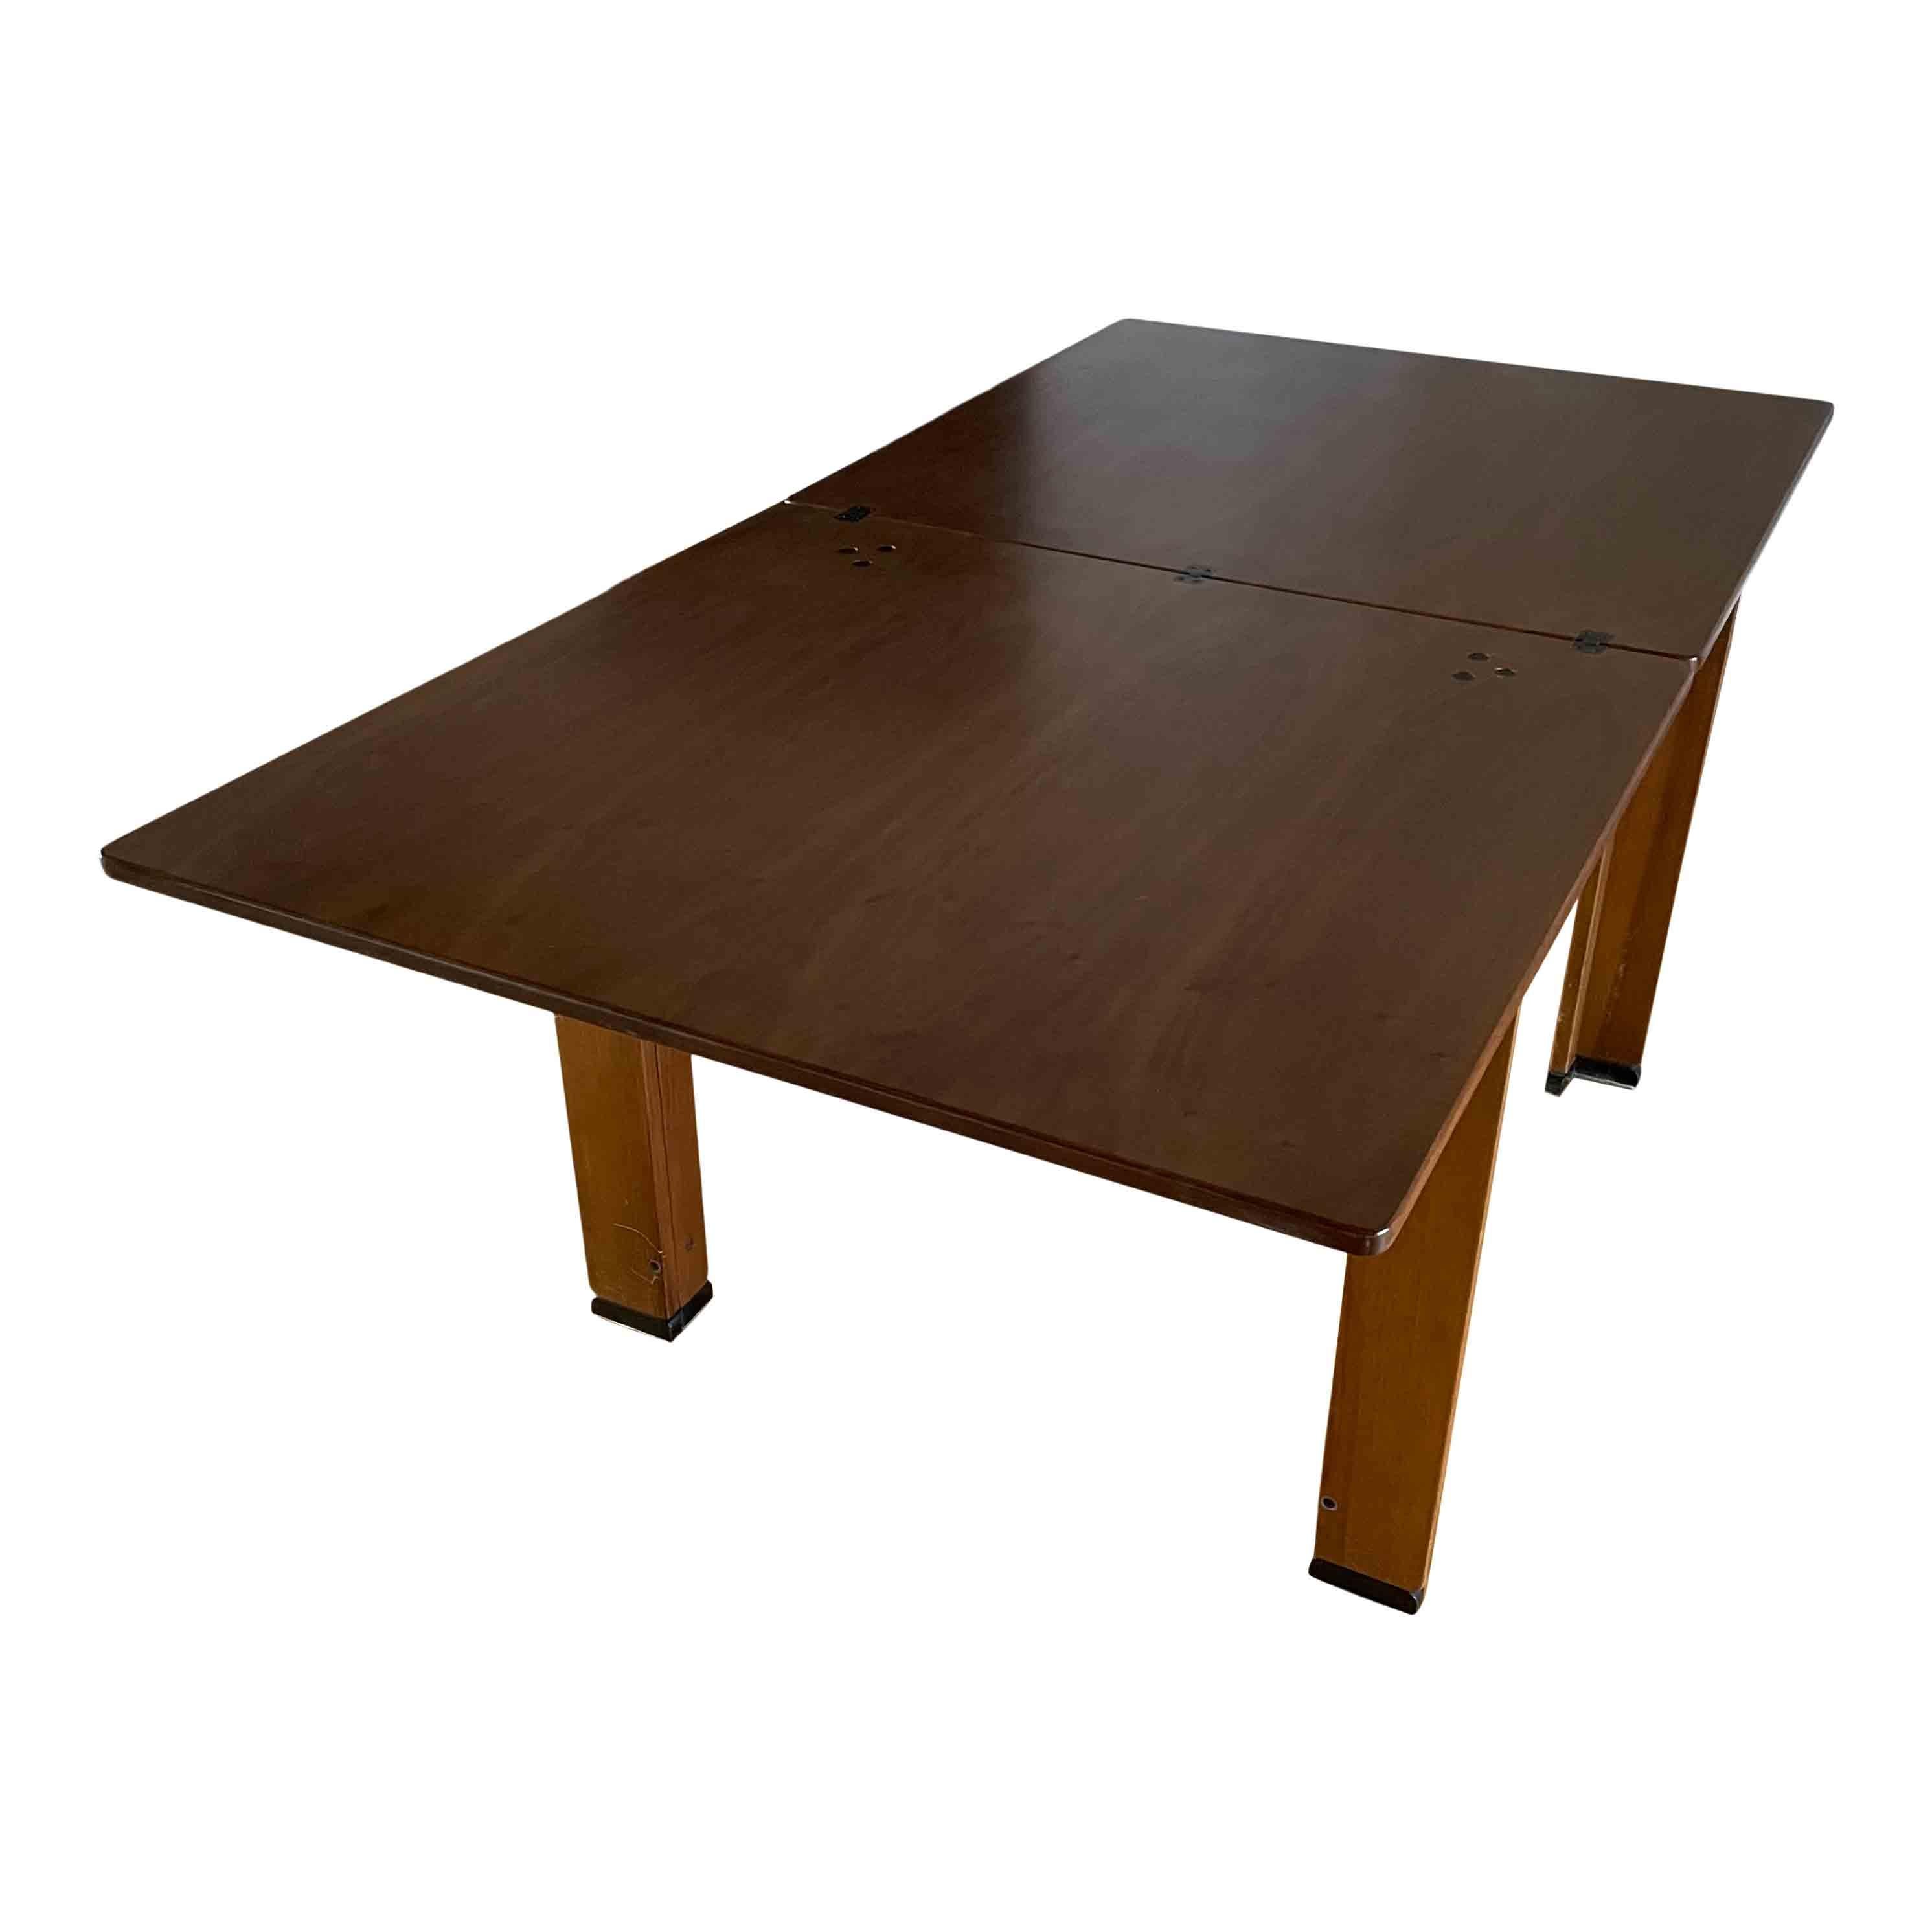 Afra & Tobia Scarpa Midcentury “778” Extensible Dining Table for Cassina, 1967 In Good Condition For Sale In Vicenza, IT